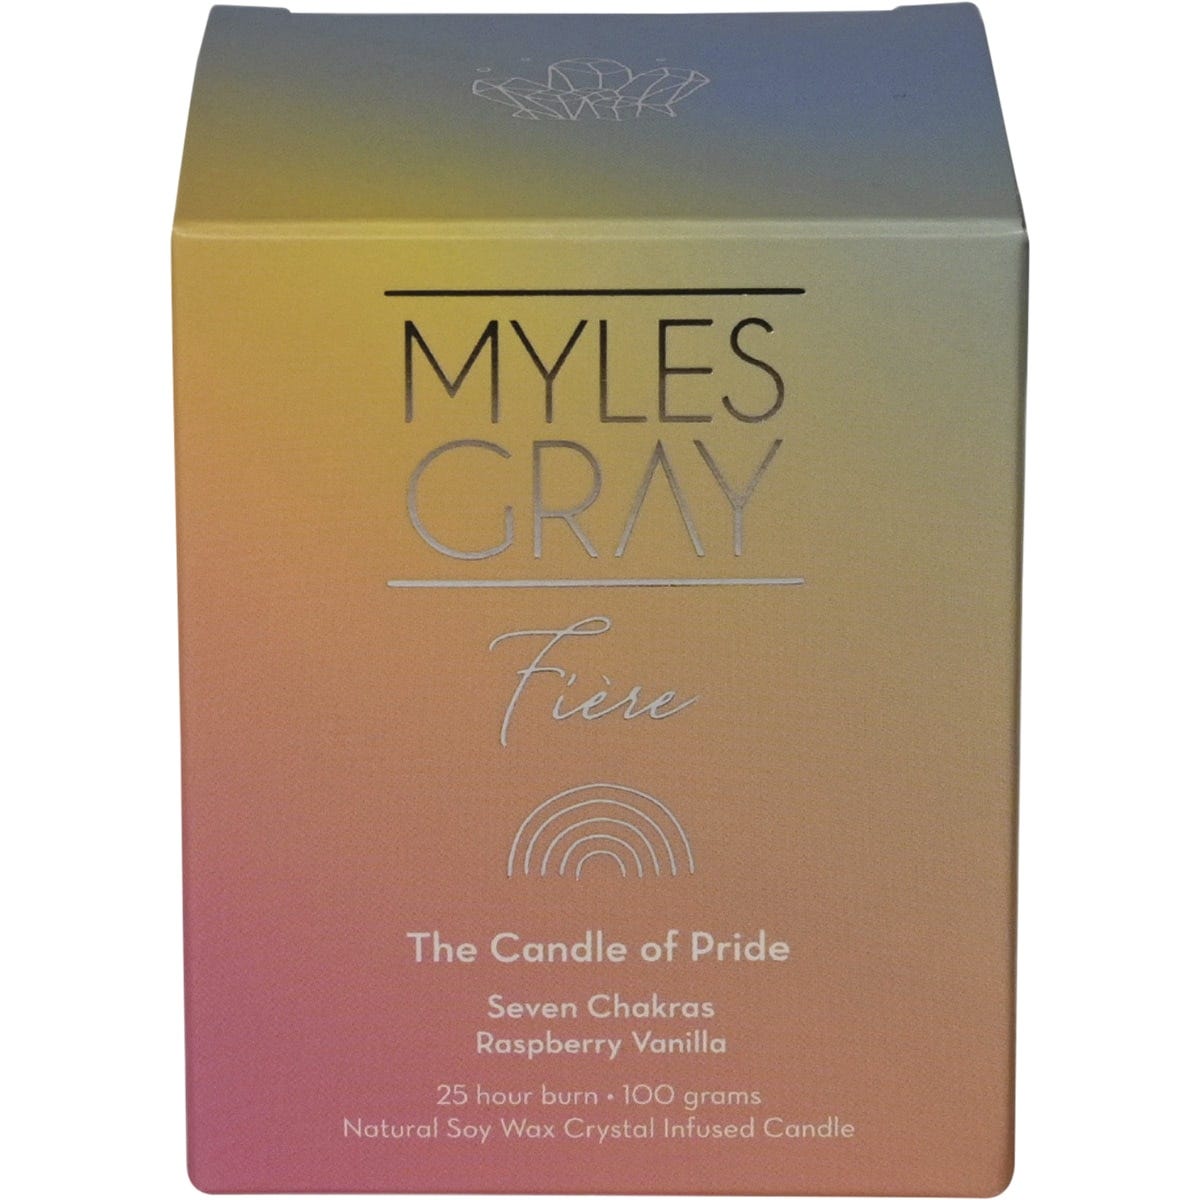 Myles Gray Crystal Infused Soy Candle Mini Pride Raspberry Vanilla